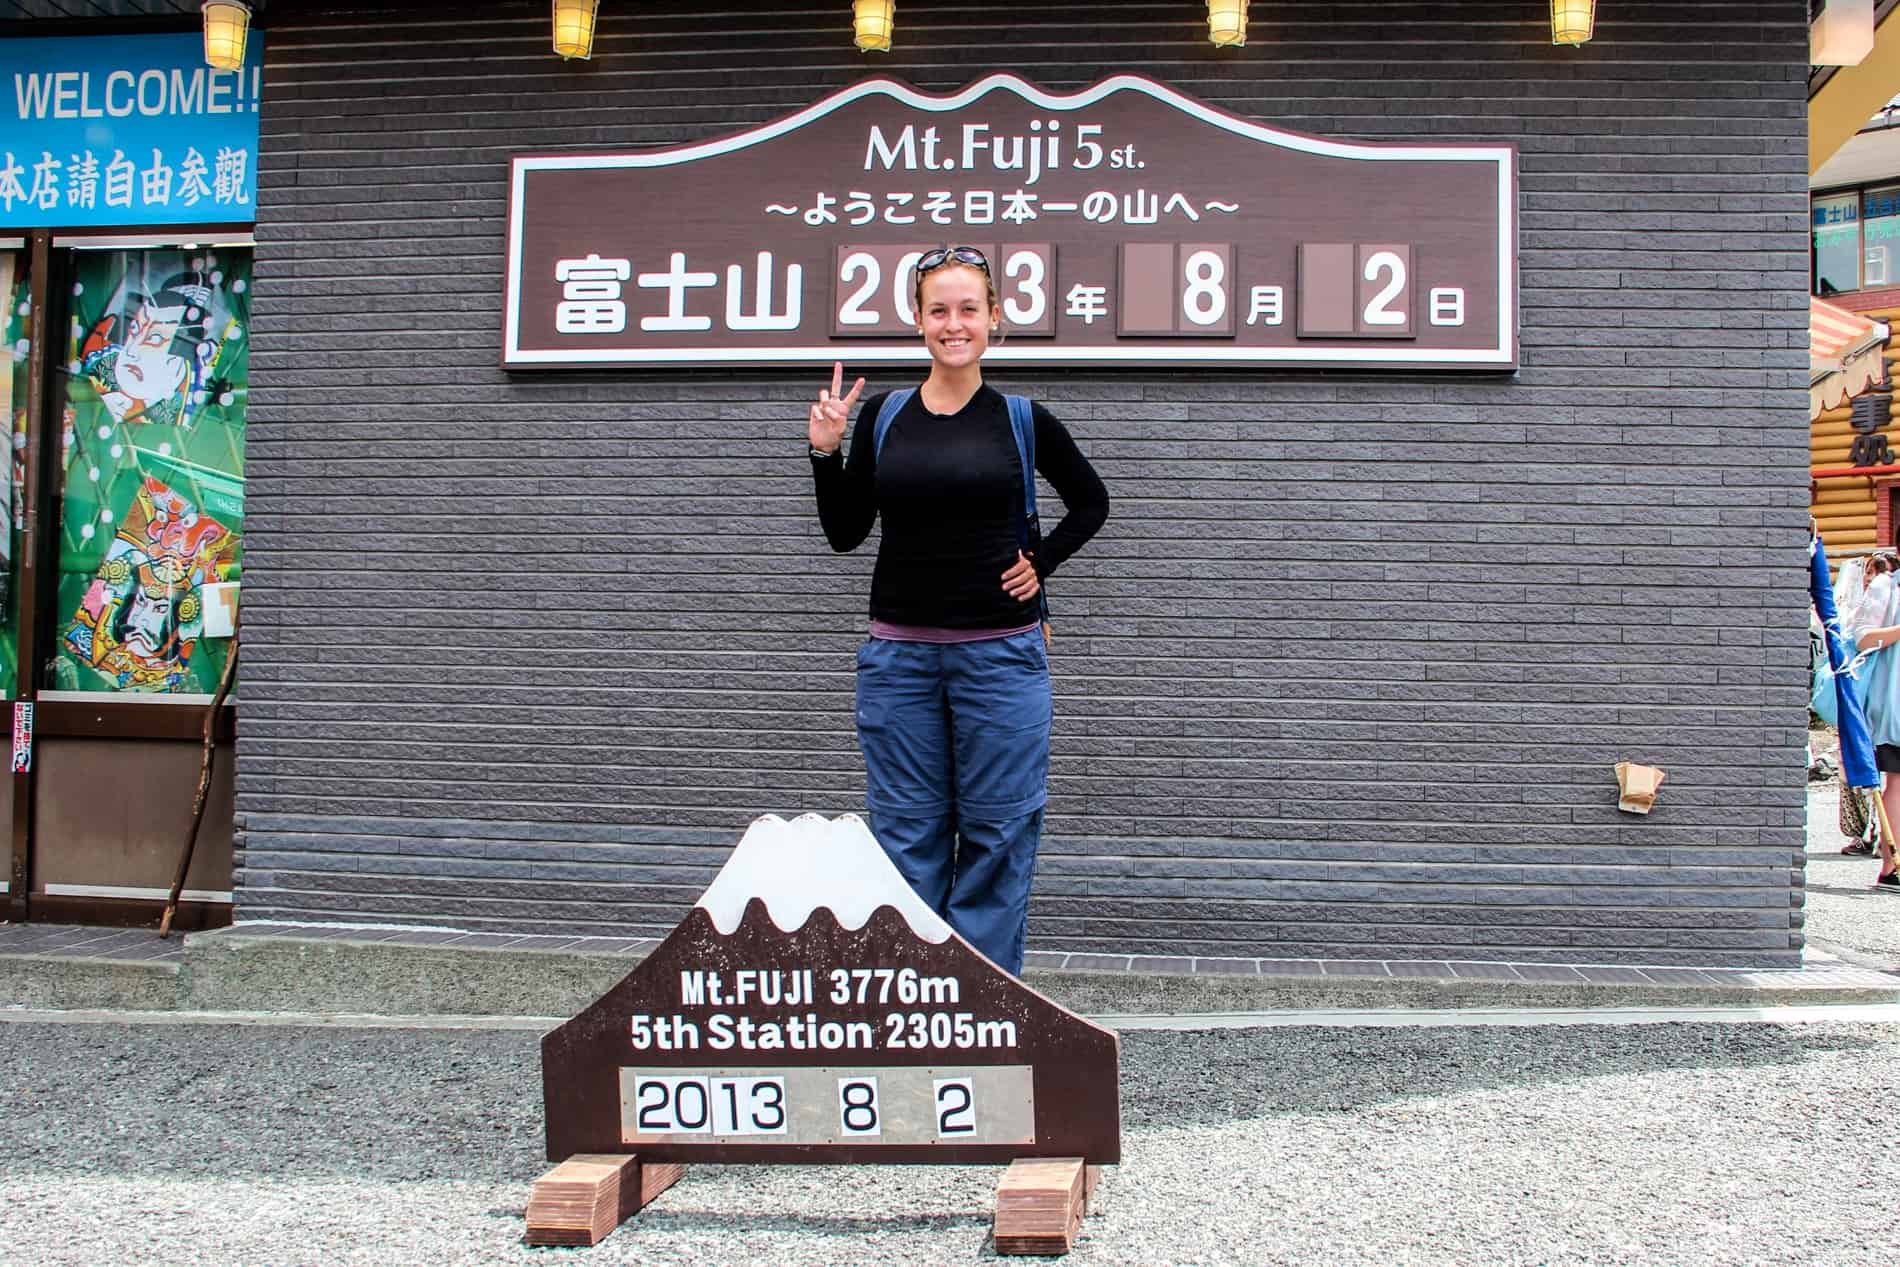 A woman smiles to the camera and makes a peace hand gesture at the sign which reads 'Mt. Fuji 3776m. 5th Station 2305m' and the date 2nd August, 2013.